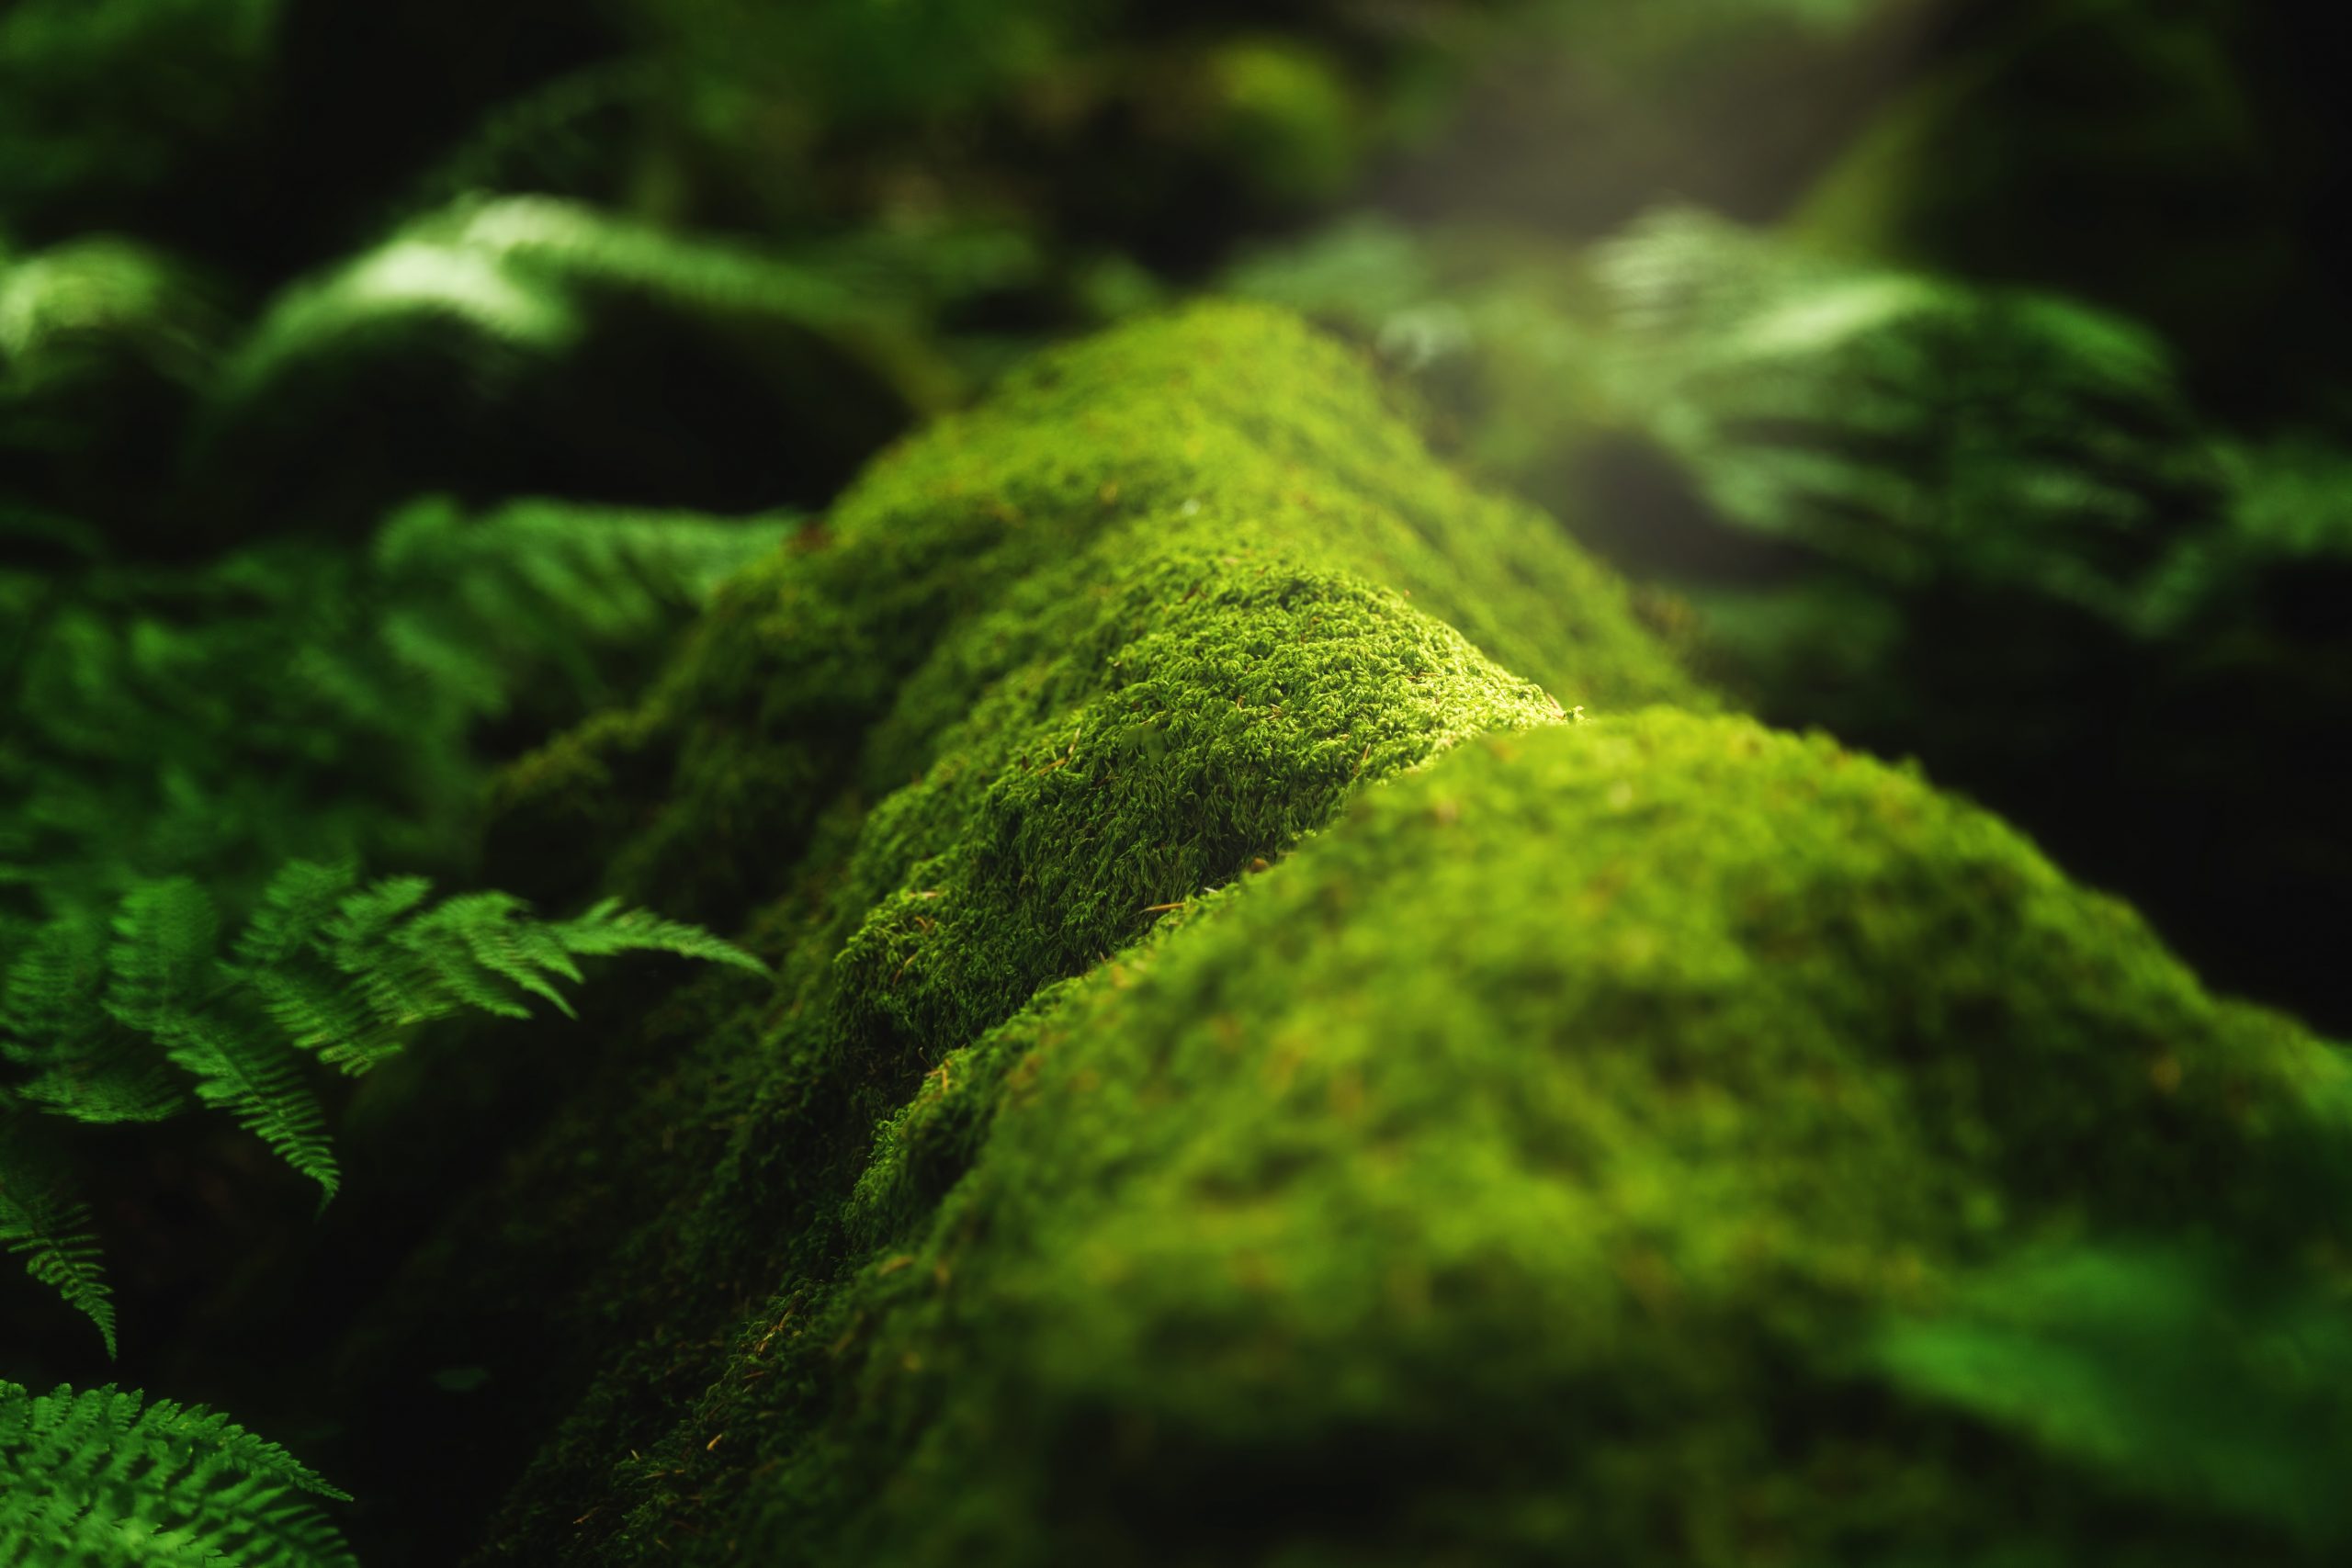 Closeup shot of moss and plants growing on a tree branch in the forest